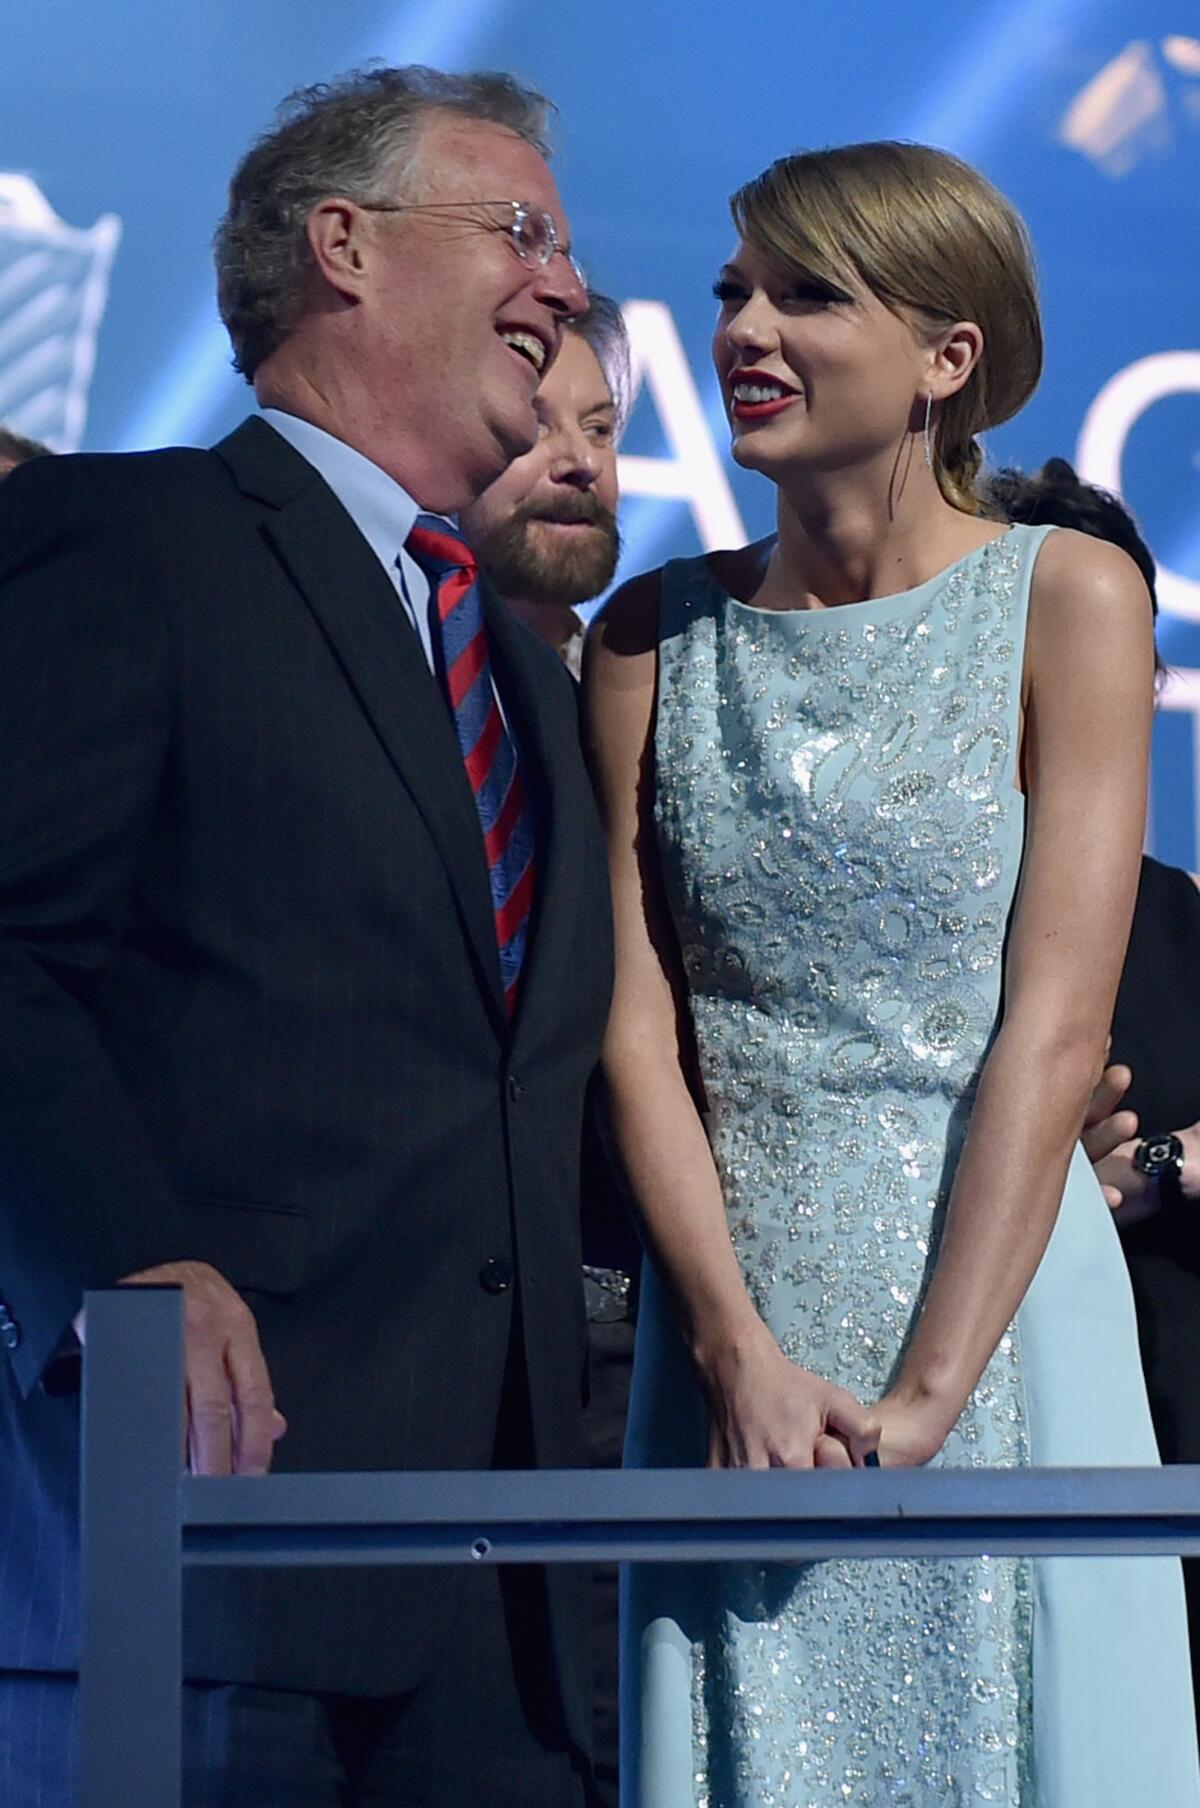 Taylor Swift’s dad won’t face charges in Sydney altercation with paparazzo